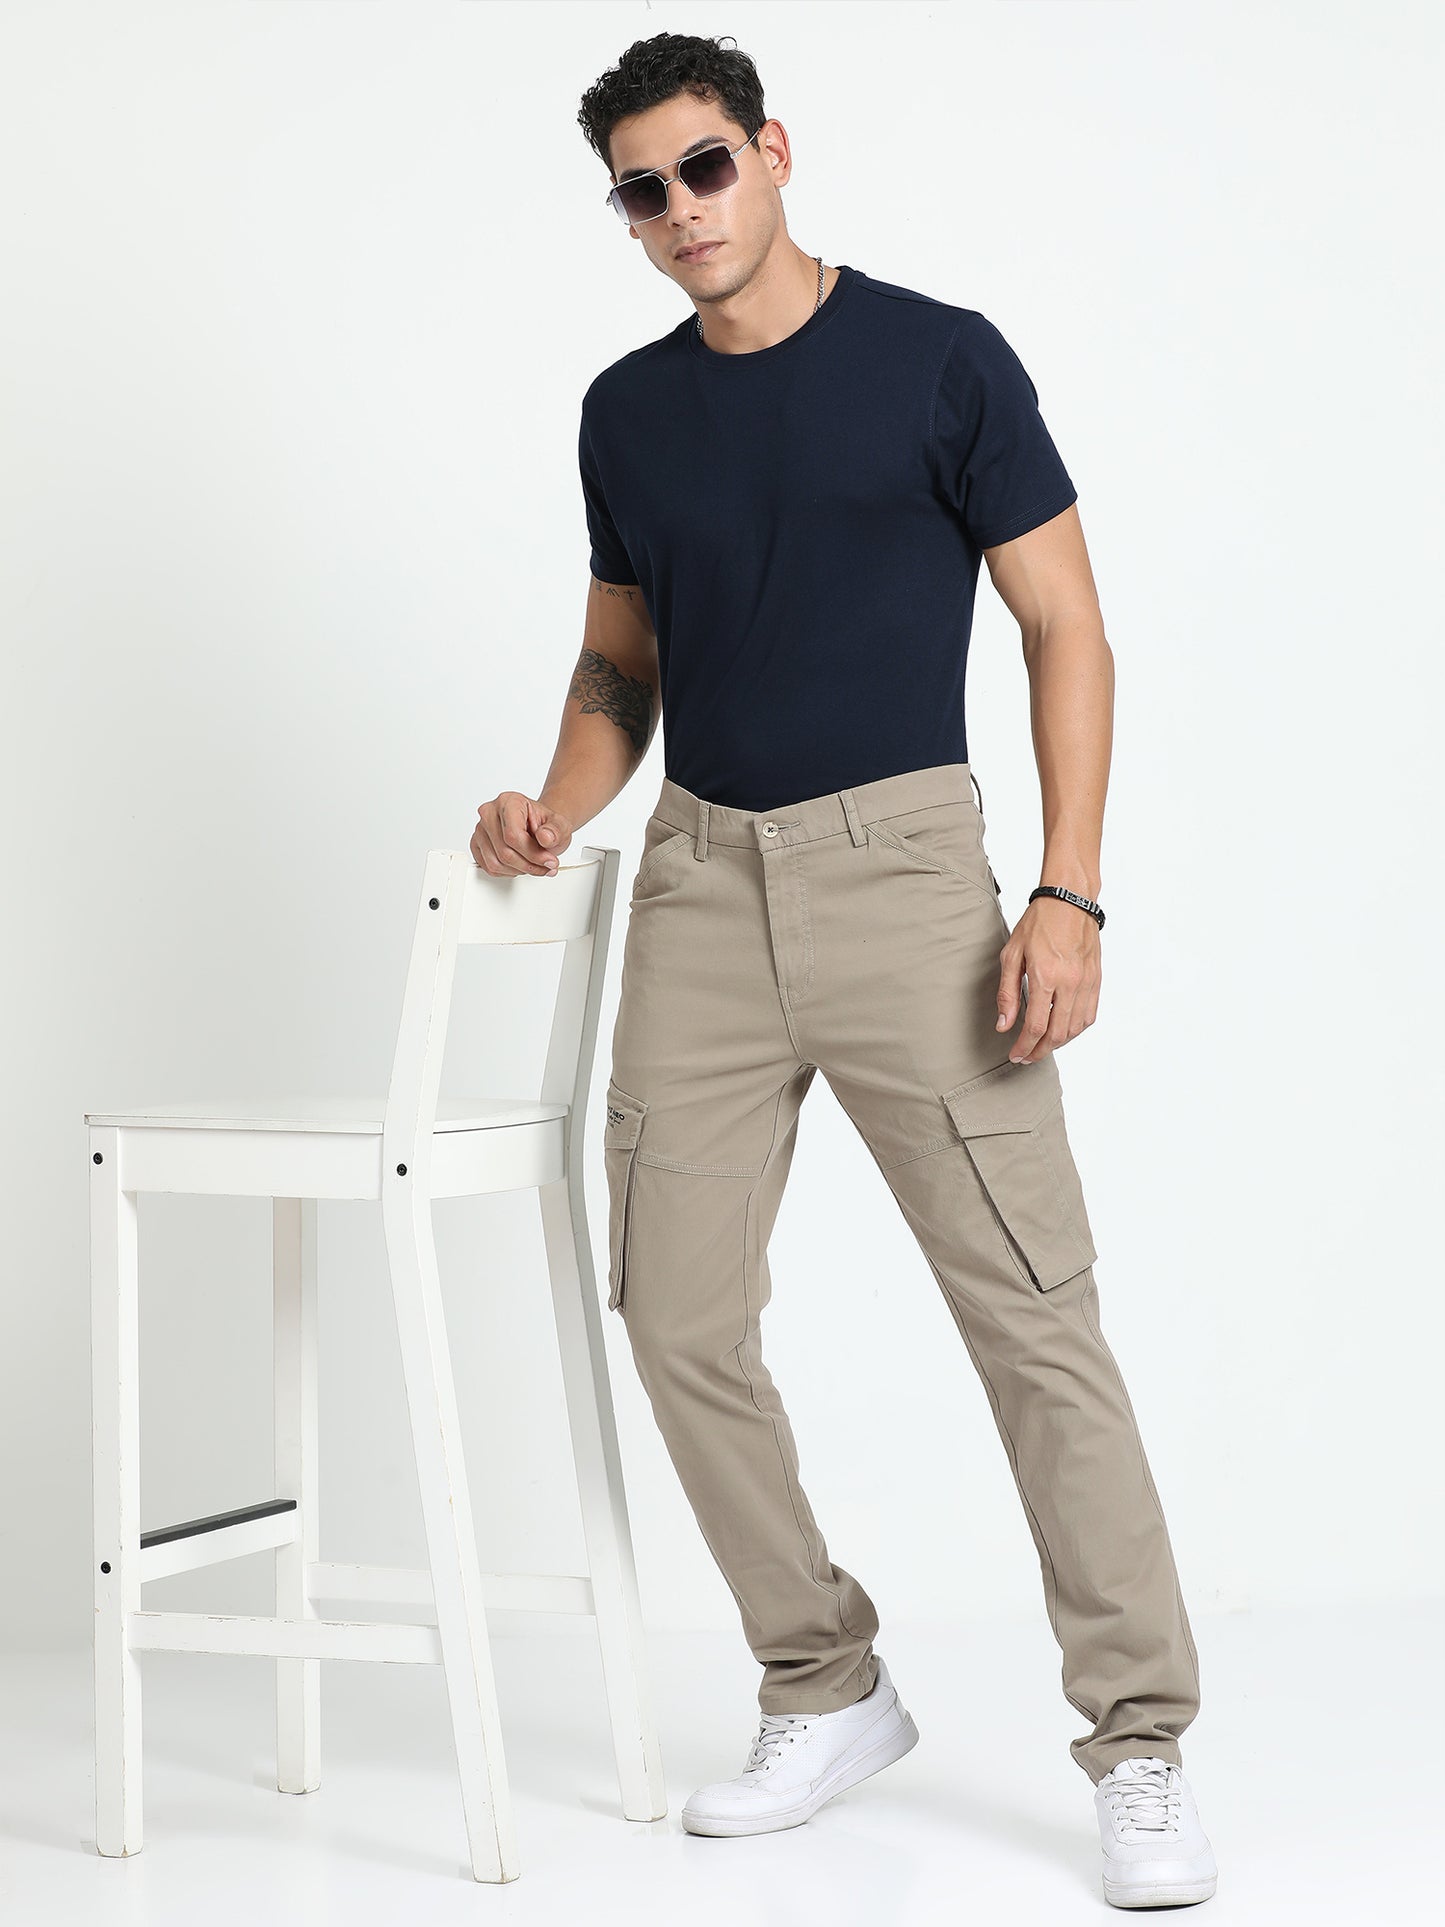 Pale Brown Cargo Pant for Men 